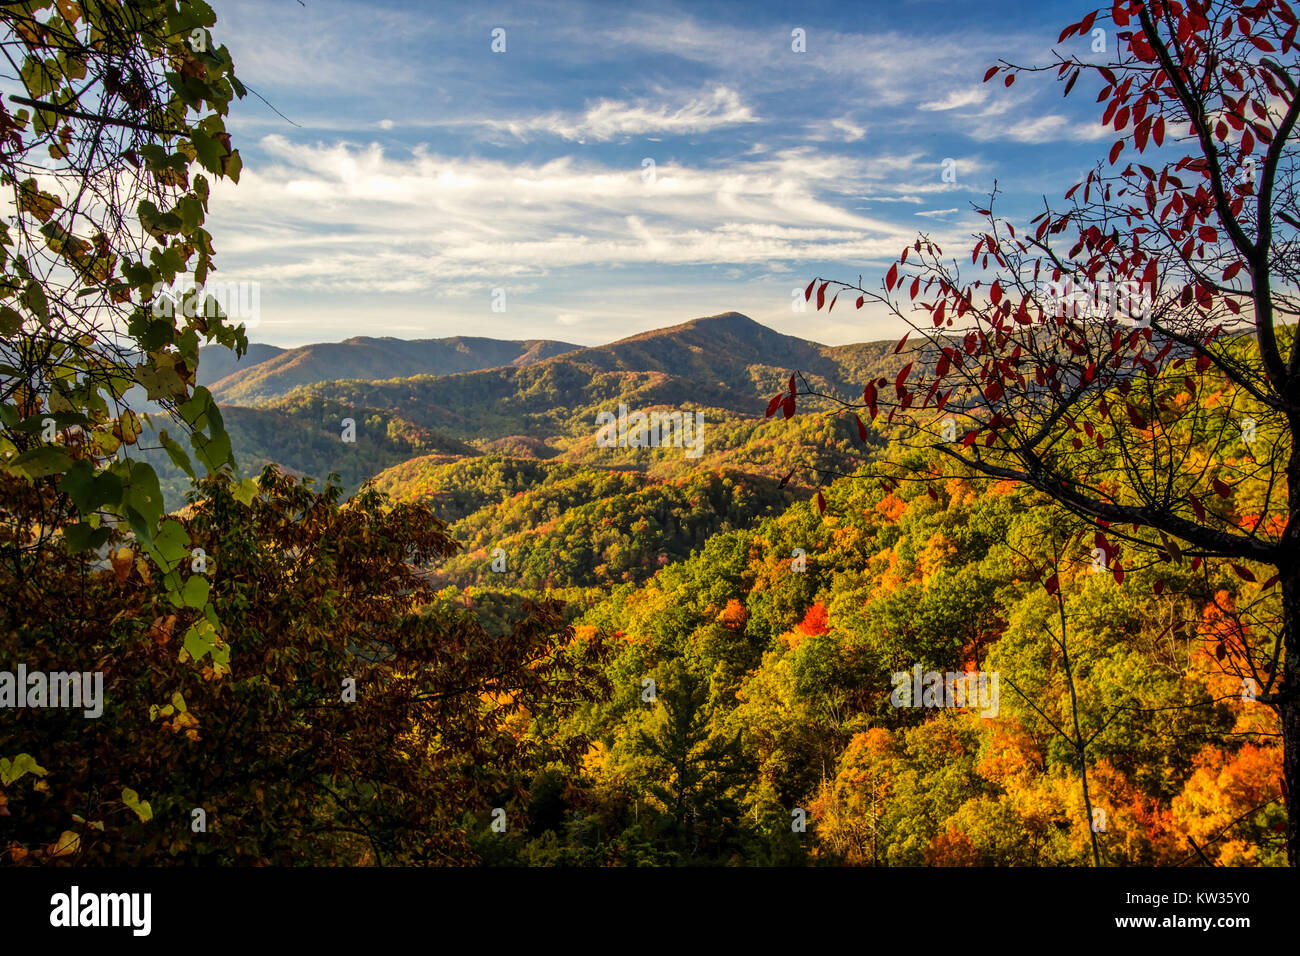 Smoky Mountains Autumn Landscapes. Autumn colors from an overlook in the Great Smoky Mountains National Park. Stock Photo